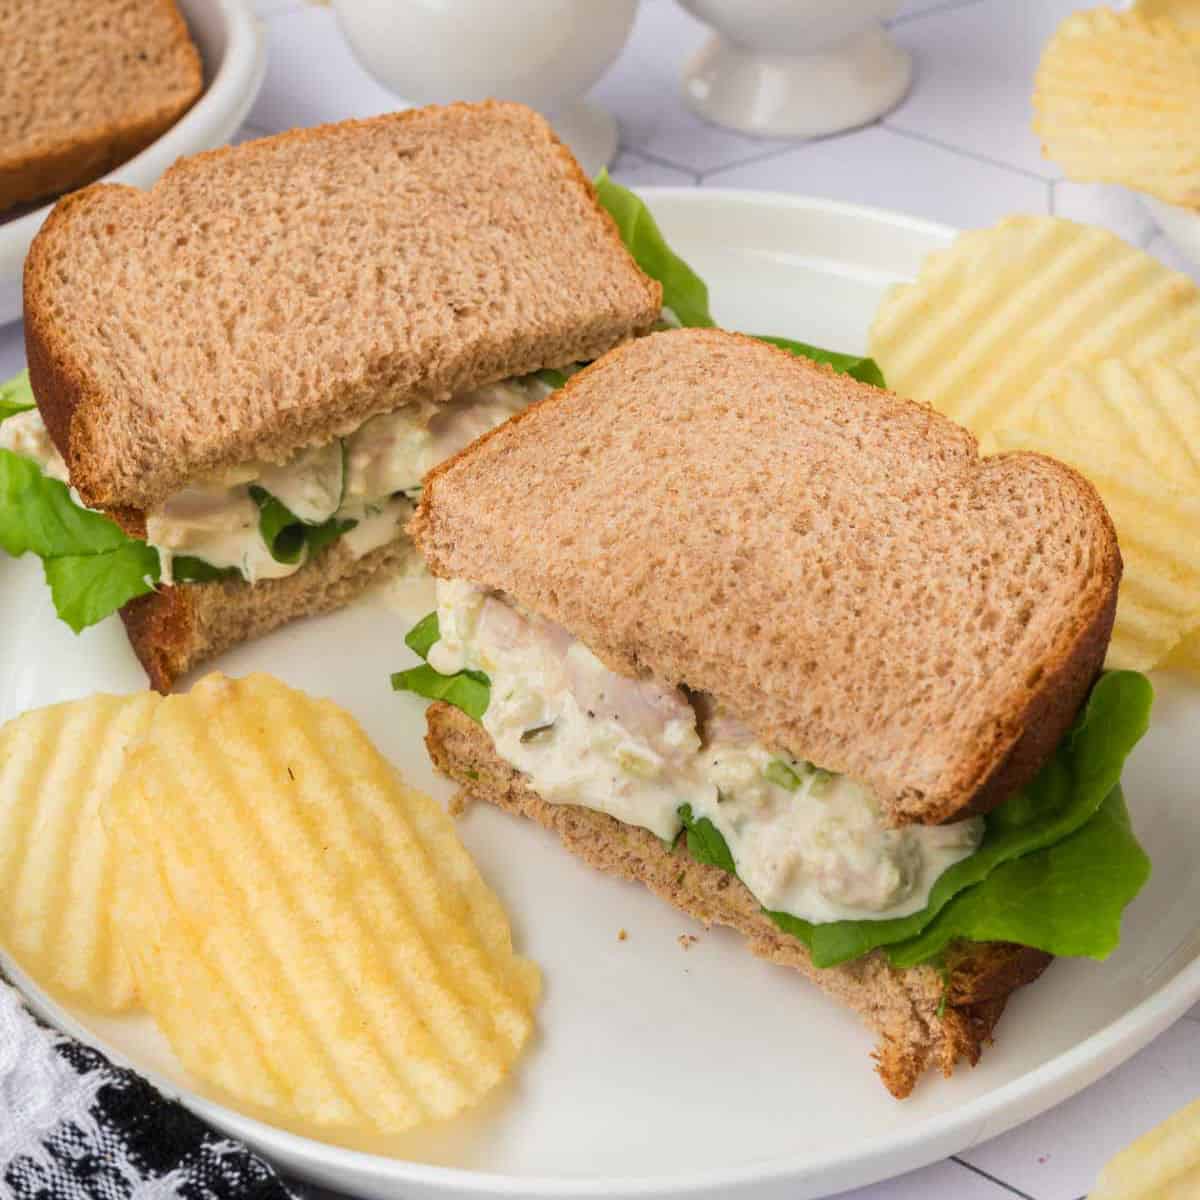 A plate with a chicken salad sandwich on whole wheat bread, cut in half and placed side by side. The sandwich contains lettuce and chicken salad filling. Rippled potato chips are served alongside, reminiscent of a classic tuna salad sandwich recipe. A checkered cloth is partially visible in the bottom left corner.